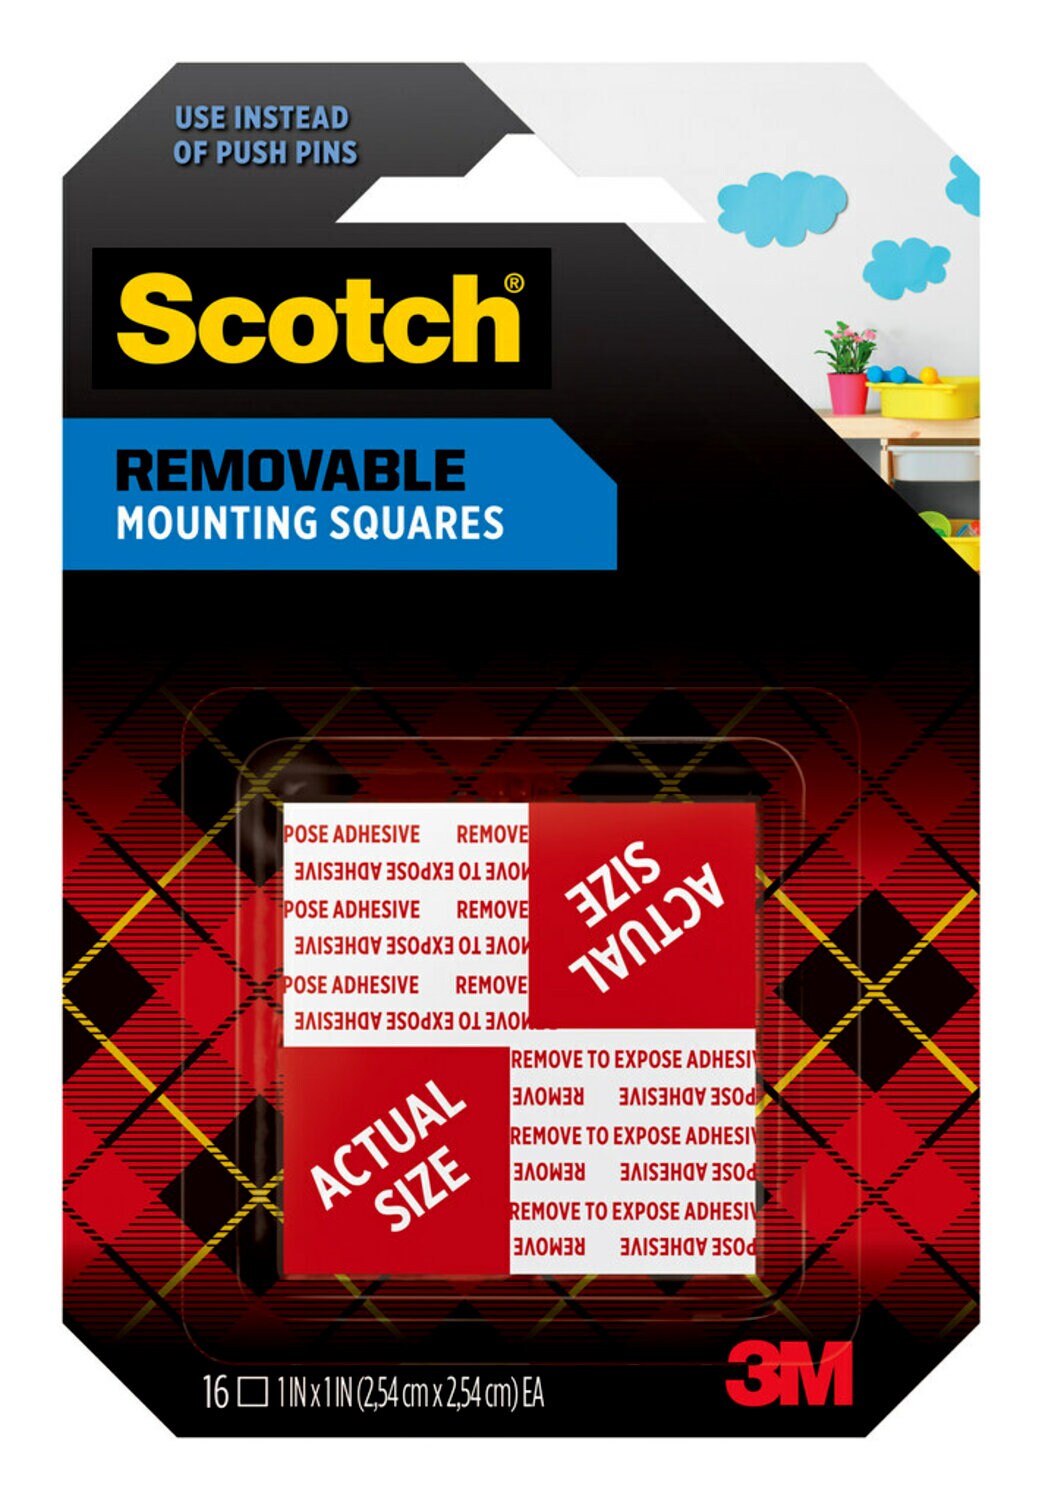 7100245433 - Scotch Removable Double-Sided Mounting Squares 108S-SQ-16, 1 in x 1 in (2.54 cm x 2.54 cm) 16/pk